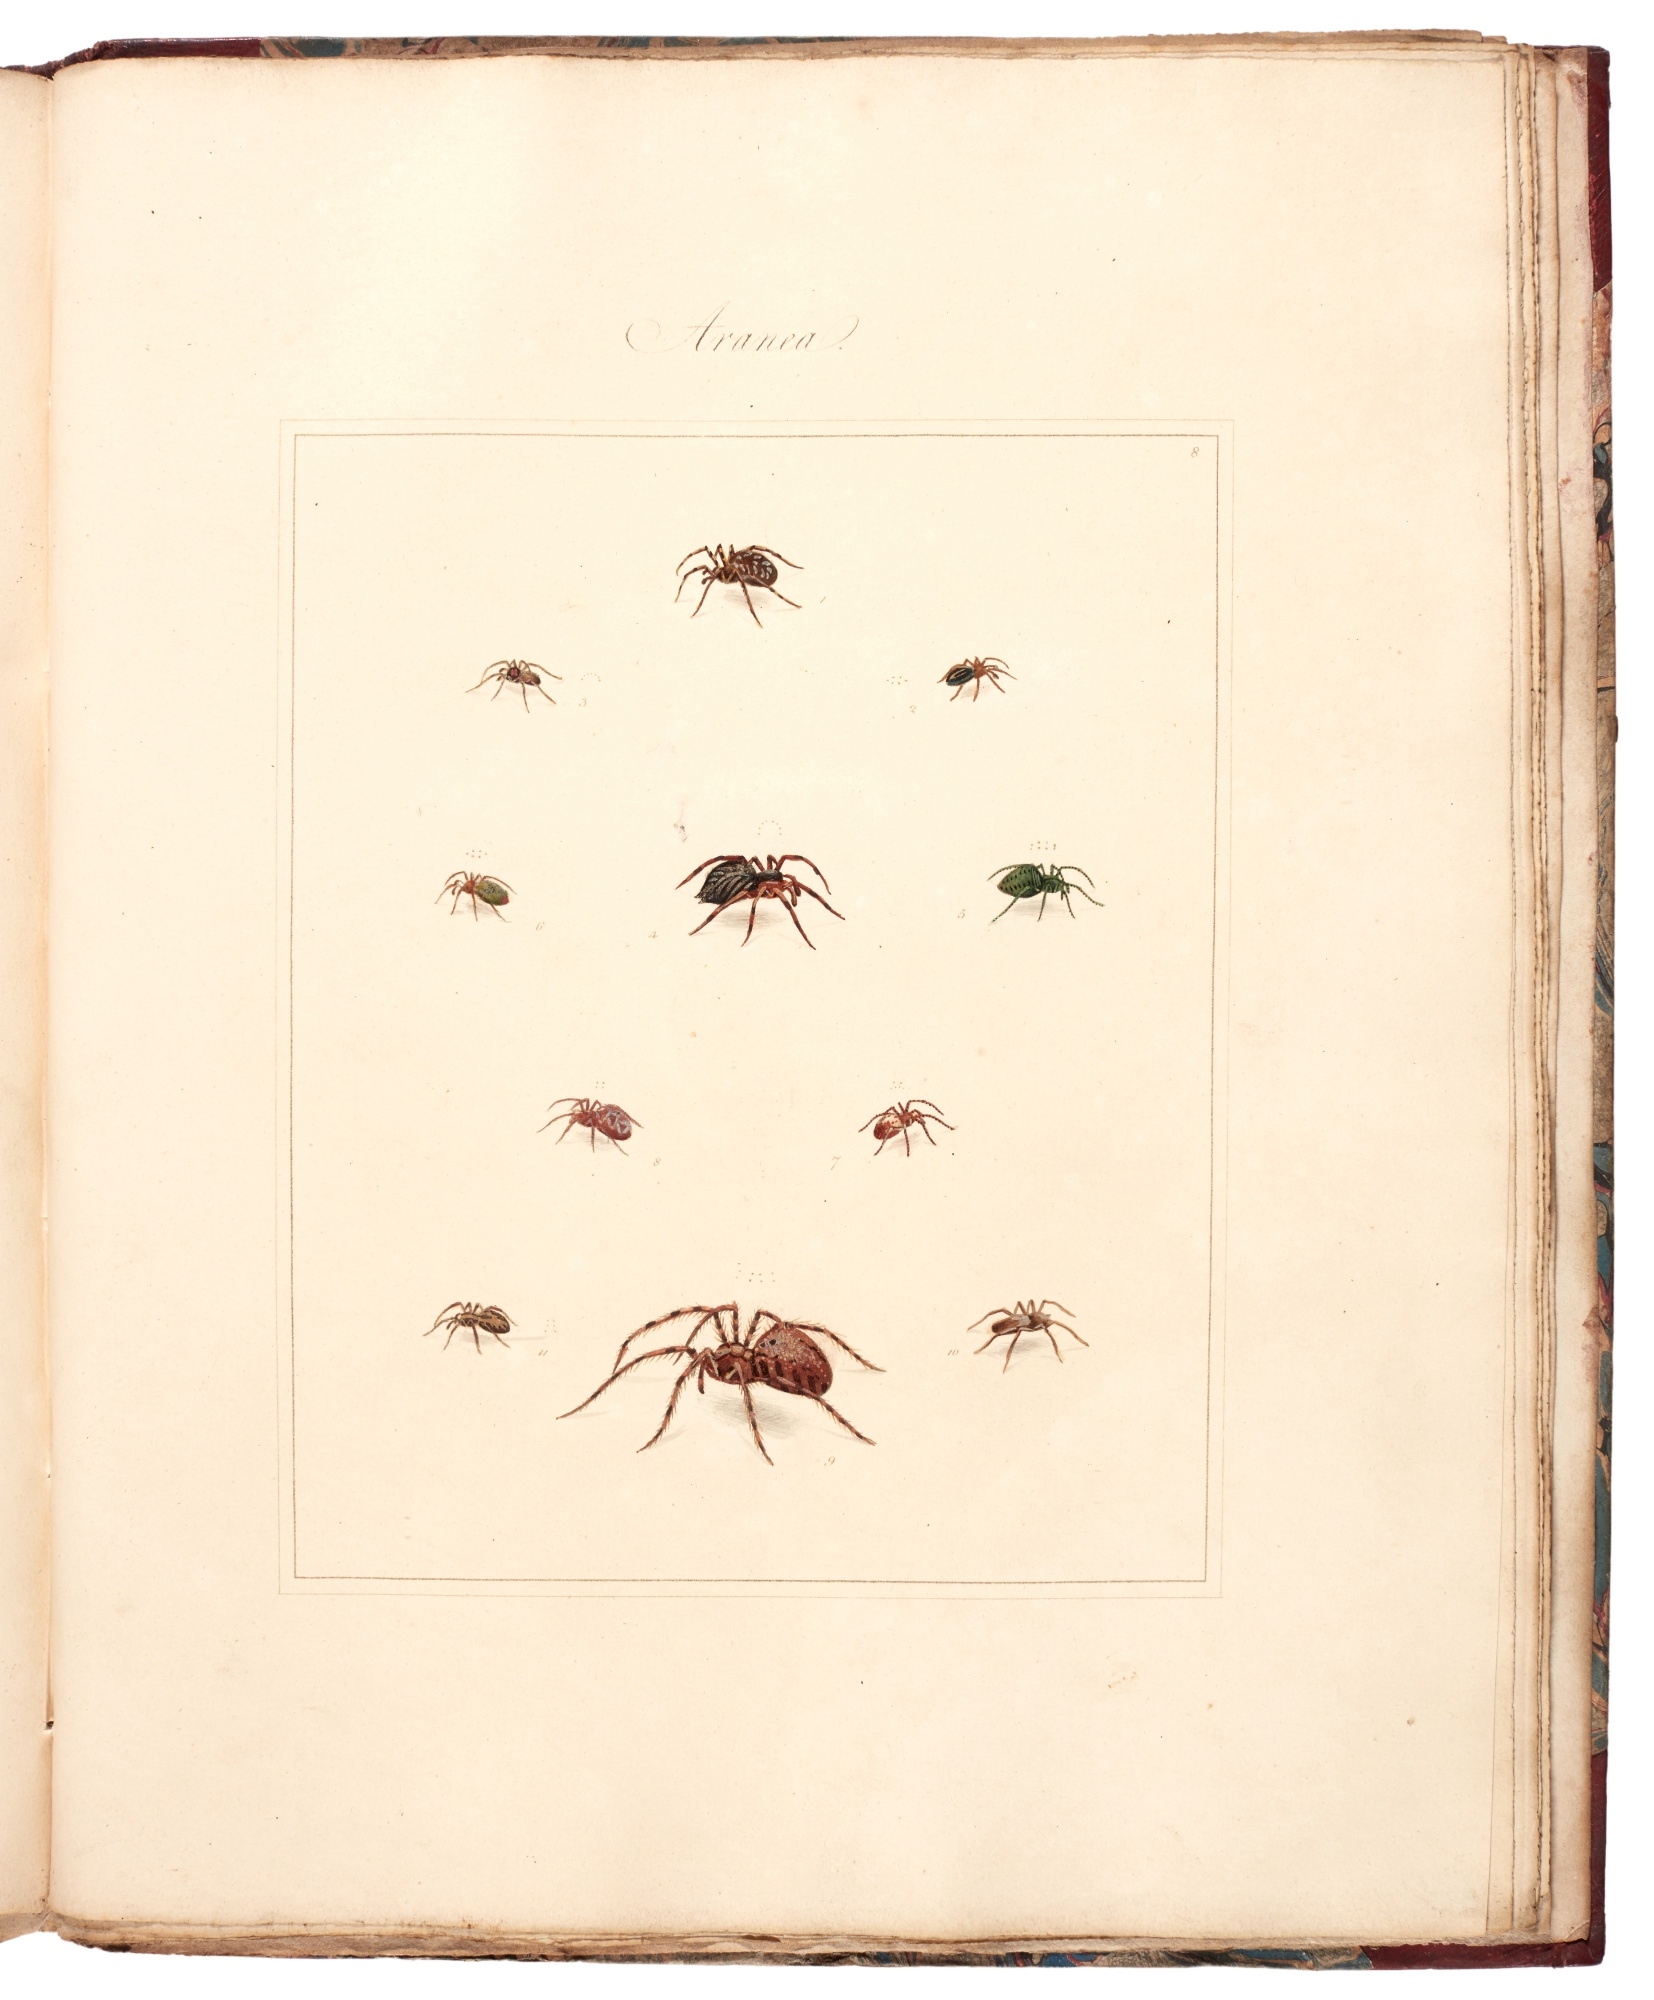 Artwork by Thomas Martyn, Aranei, or a natural history of spiders, Made of Hand colored stipple engraved panels (28)